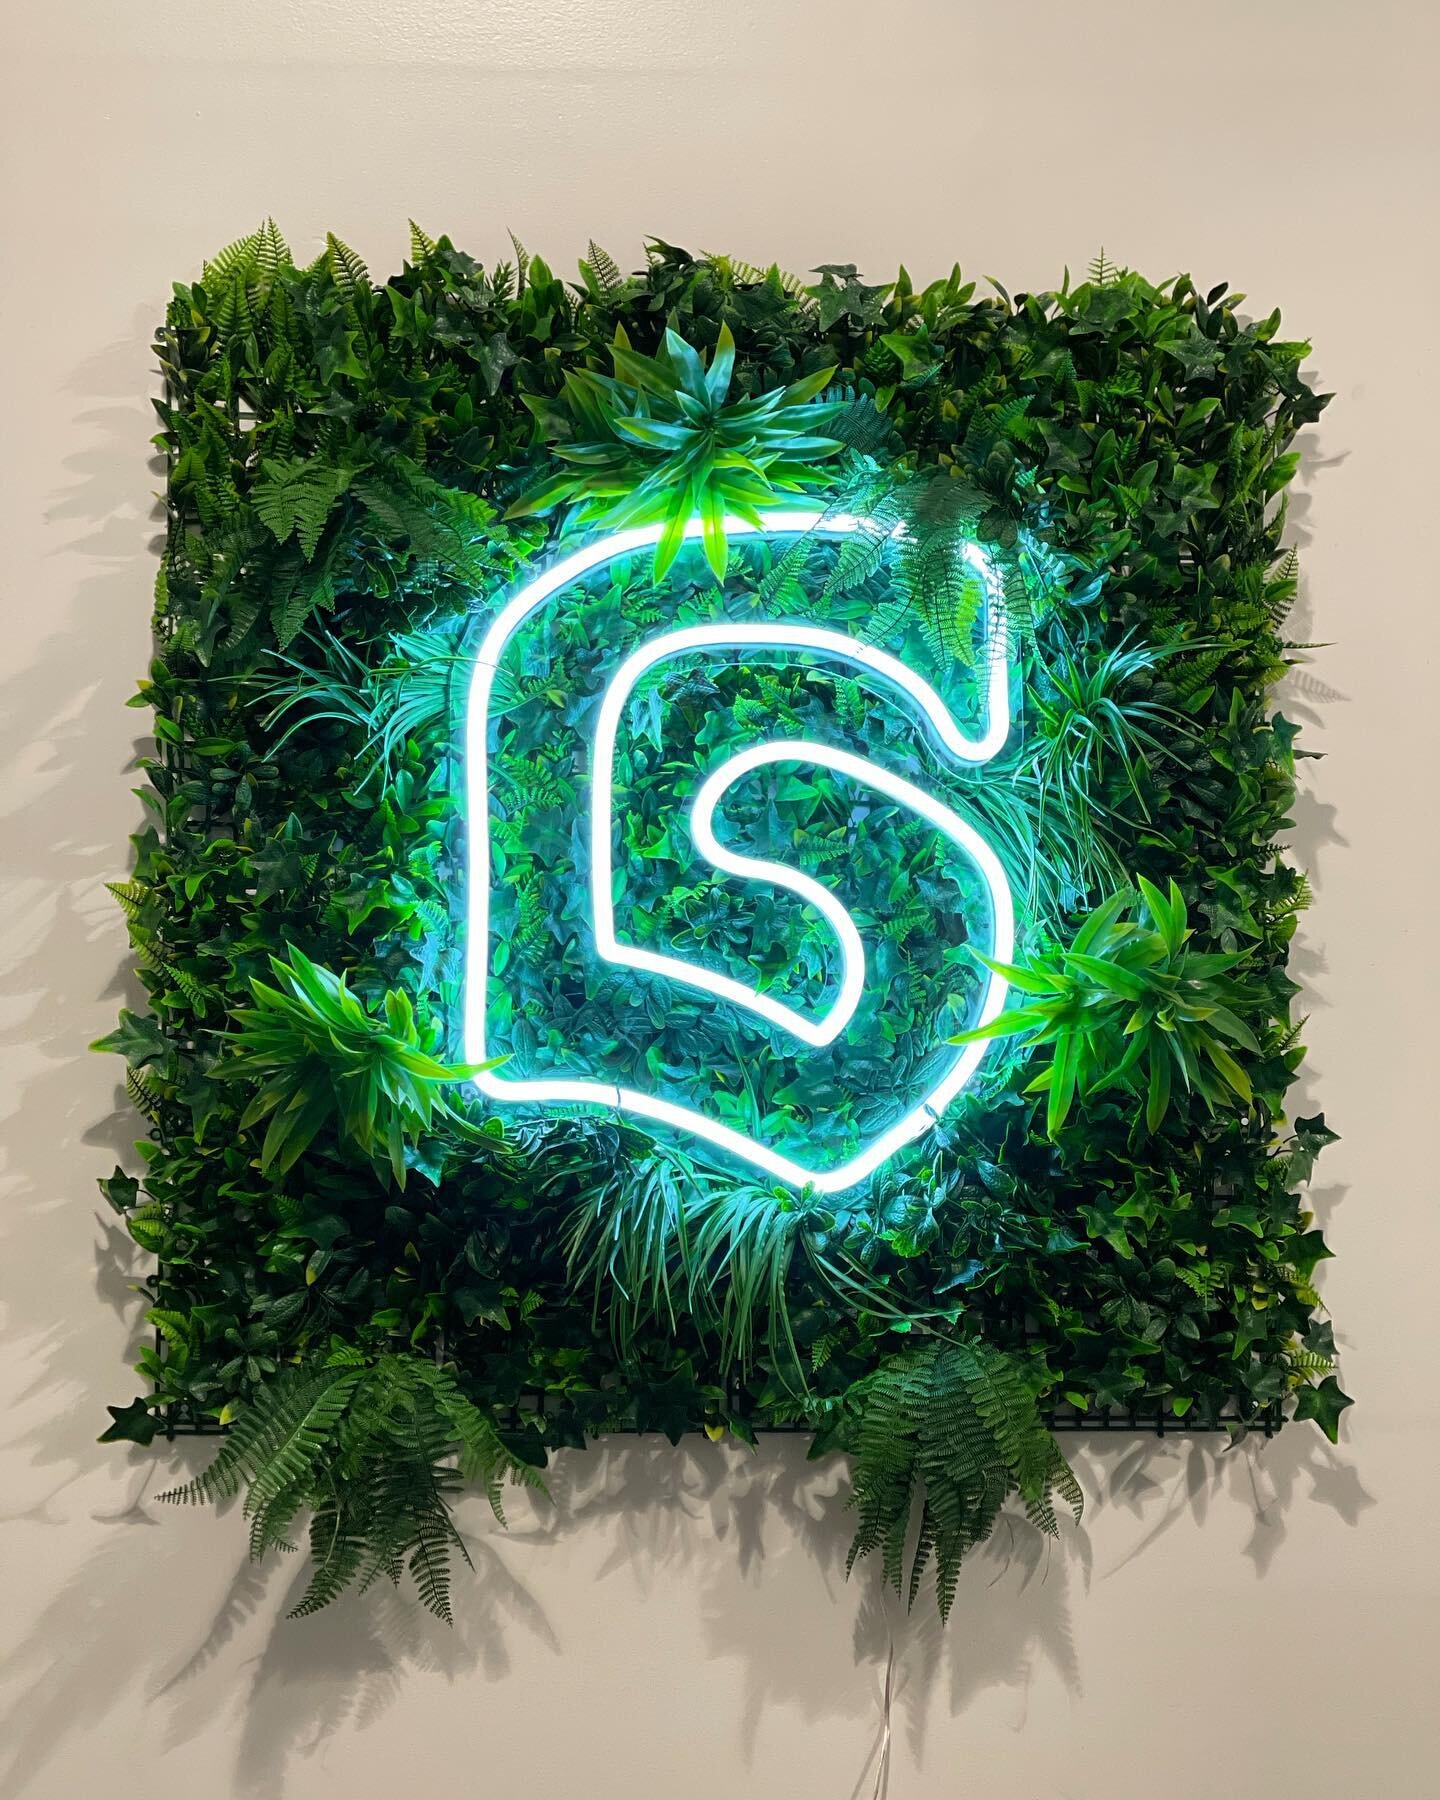 we love a neon sign. 

&ldquo;G&rdquo; design by @masonauguste

Available for bookings - email us! greenwoodstudiosnyc@gmail.com